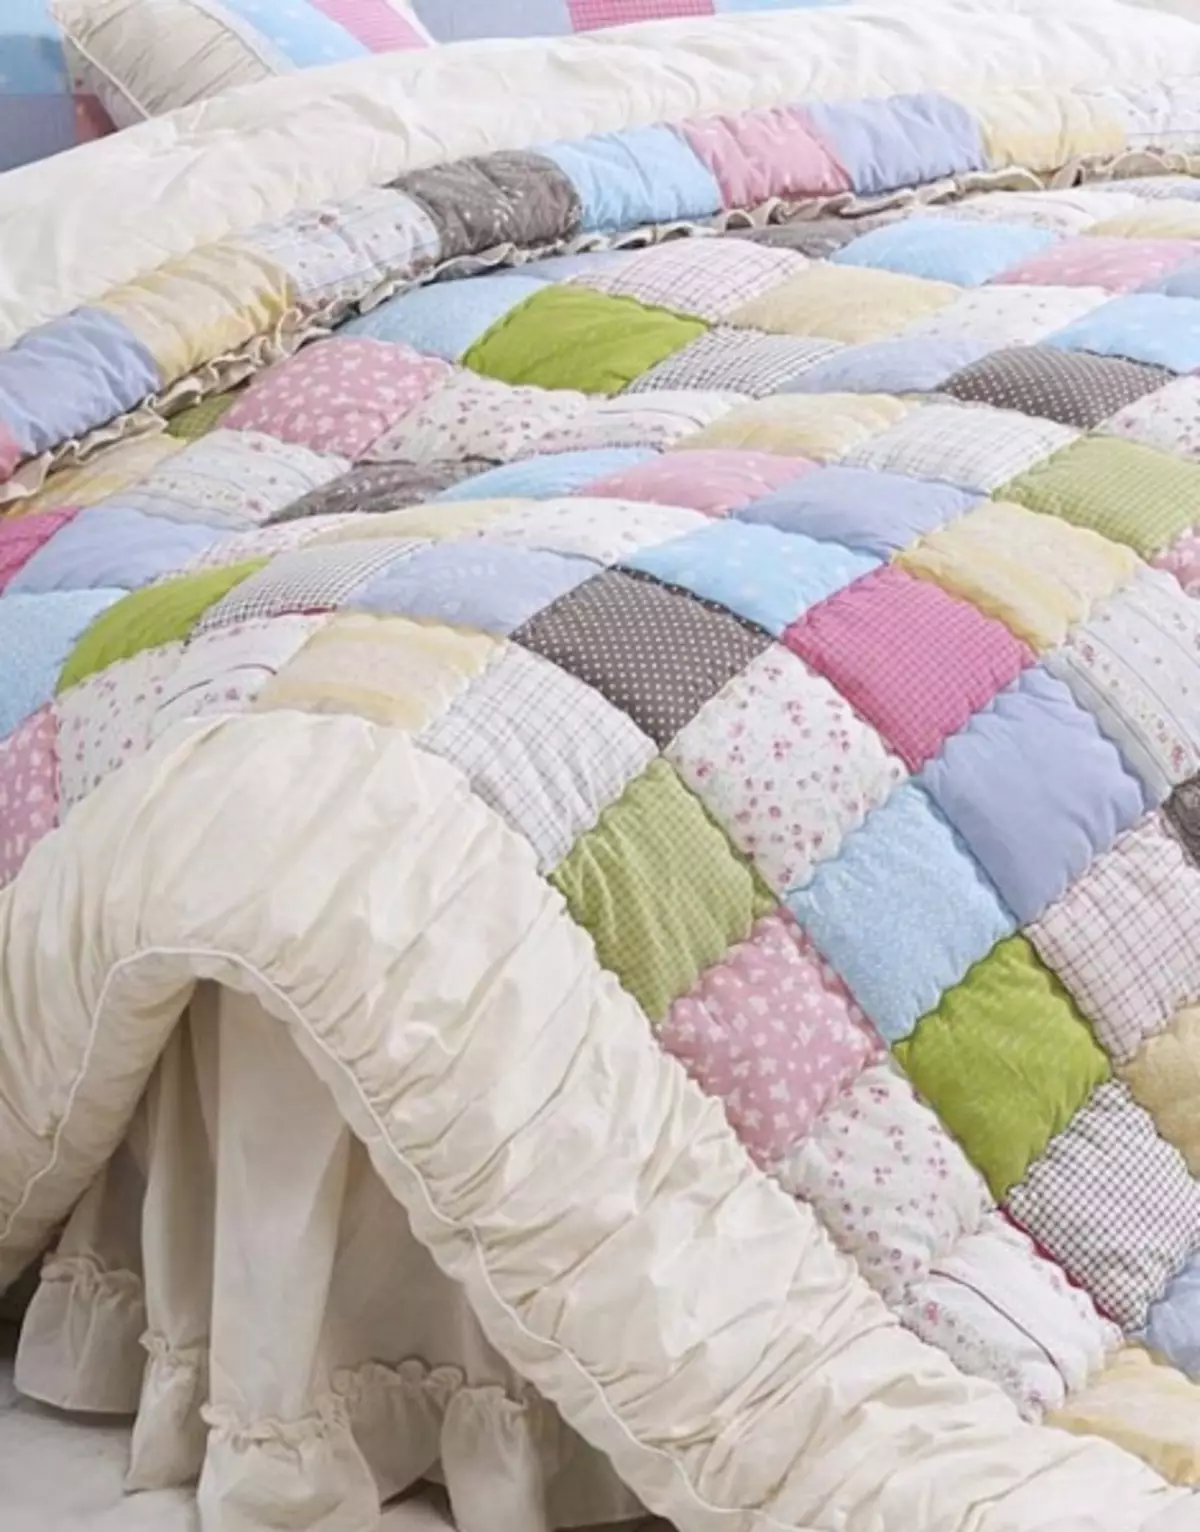 Quilted blanket with your hands: master class for beginners